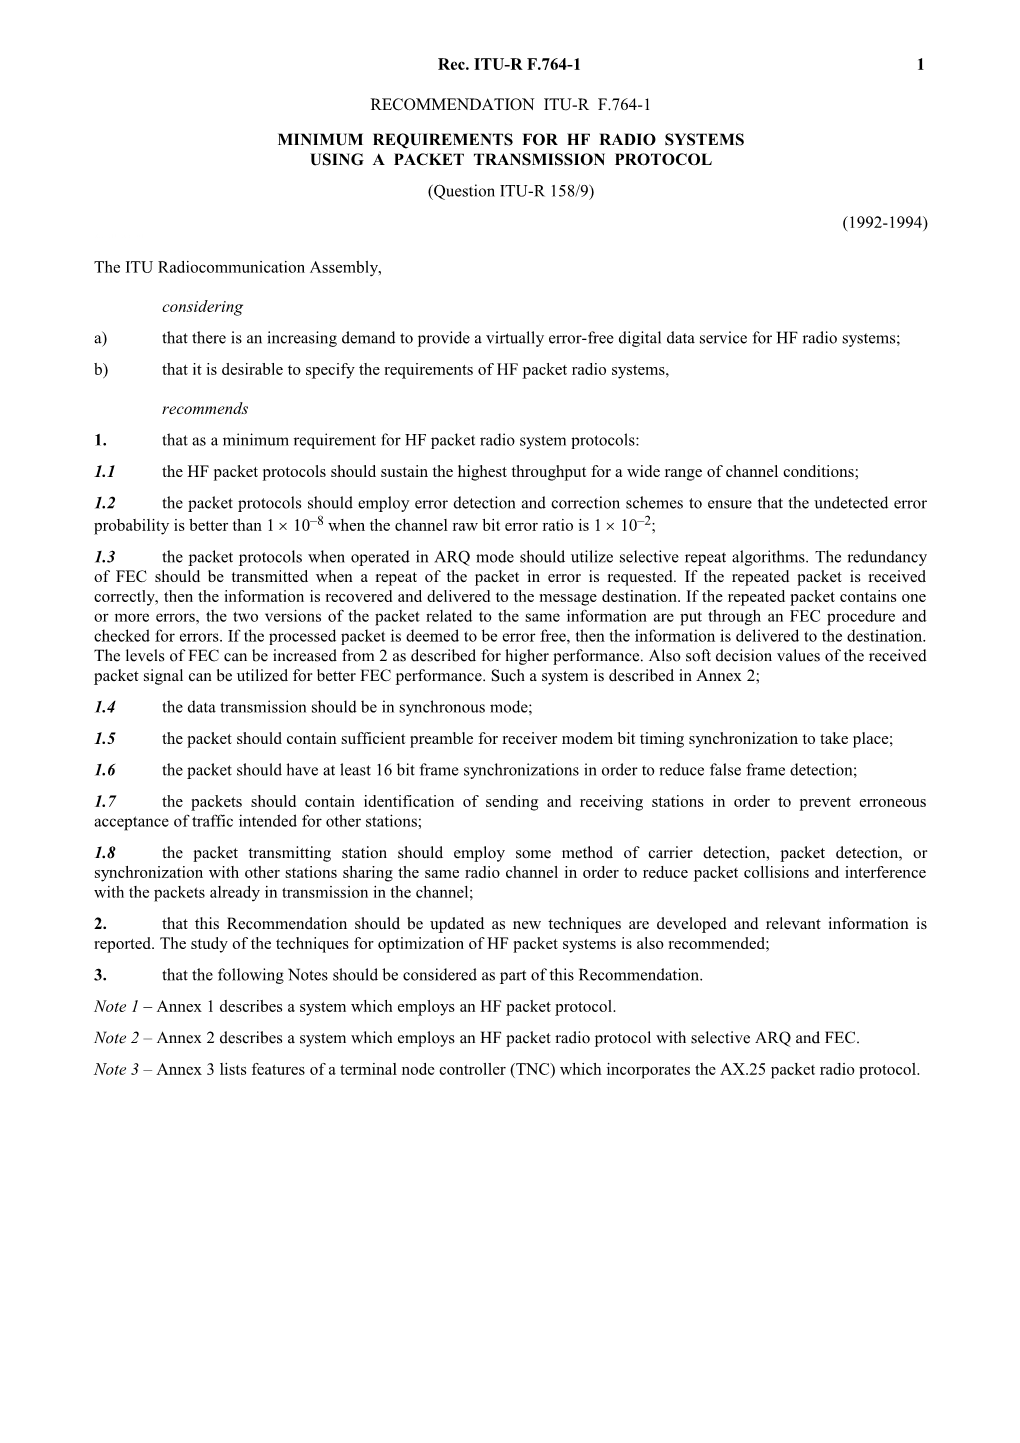 F.764-1 - Minimum Requirements for HF Radio Systems Using a Packet Transmission Protocol